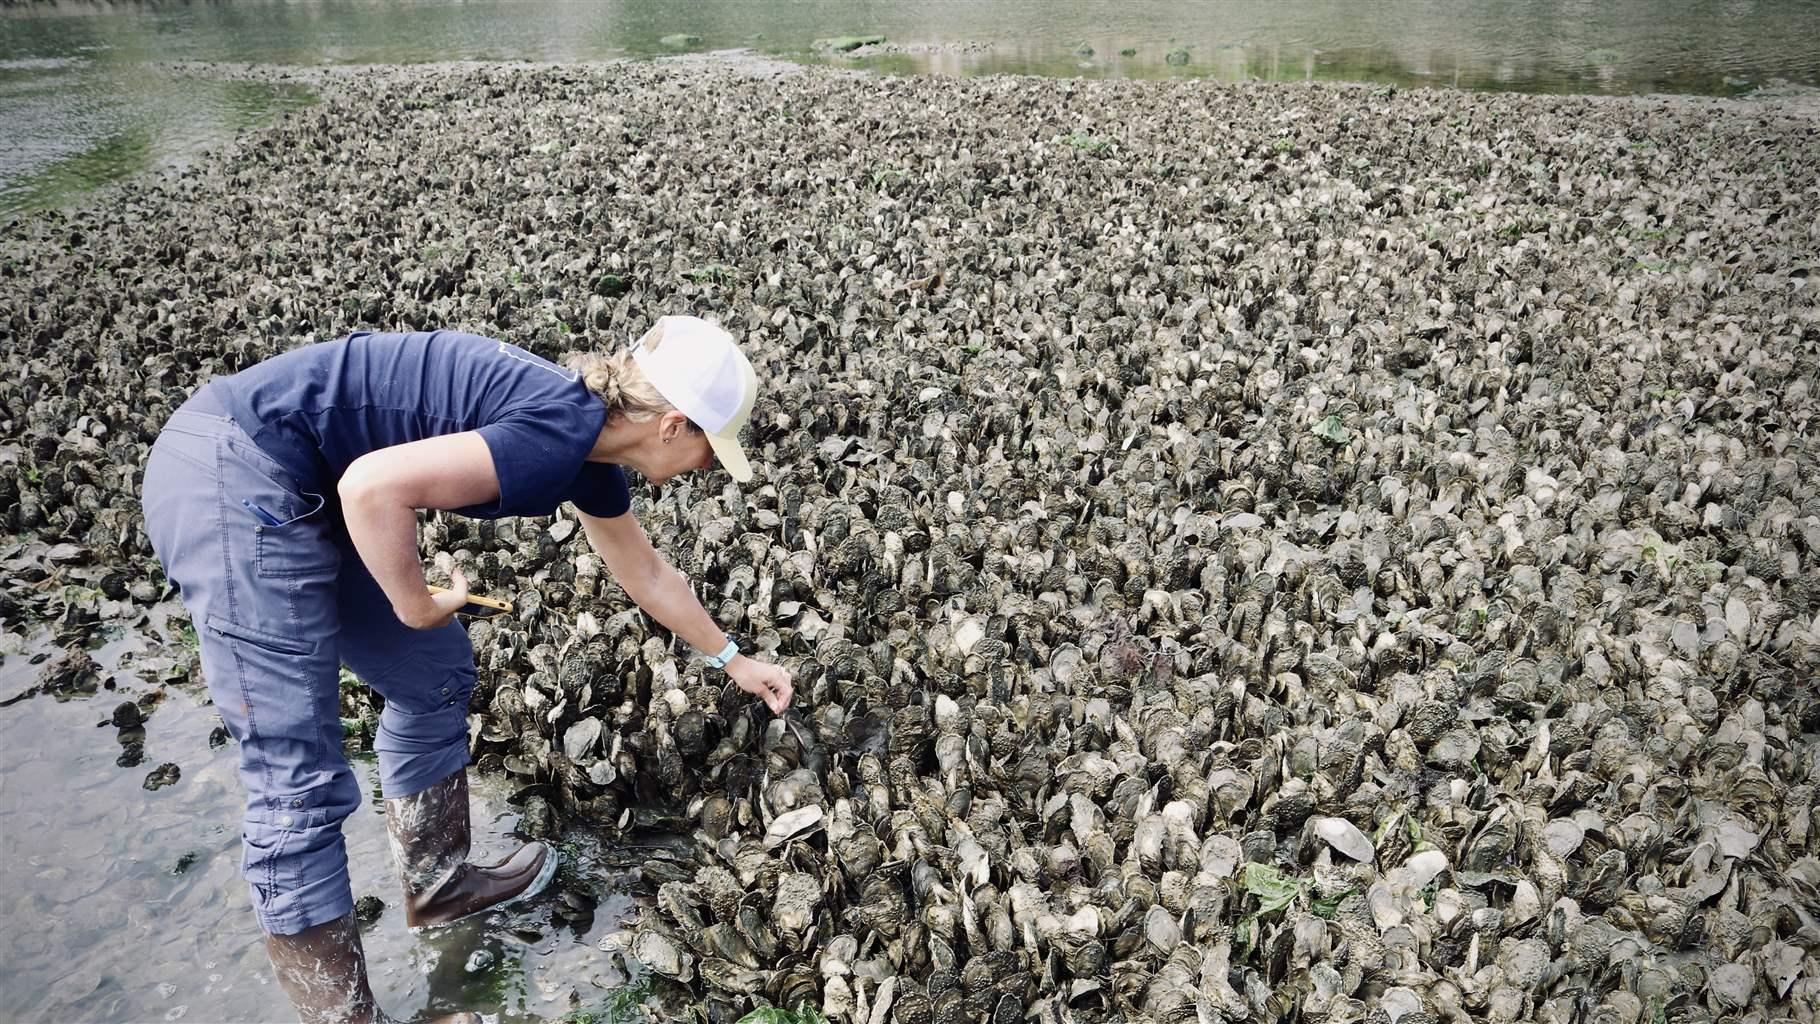 In Ash Creek, Tessa Getchis of Connecticut Sea Grant examines oysters in a natural bed in Fairfield, Connecticut.